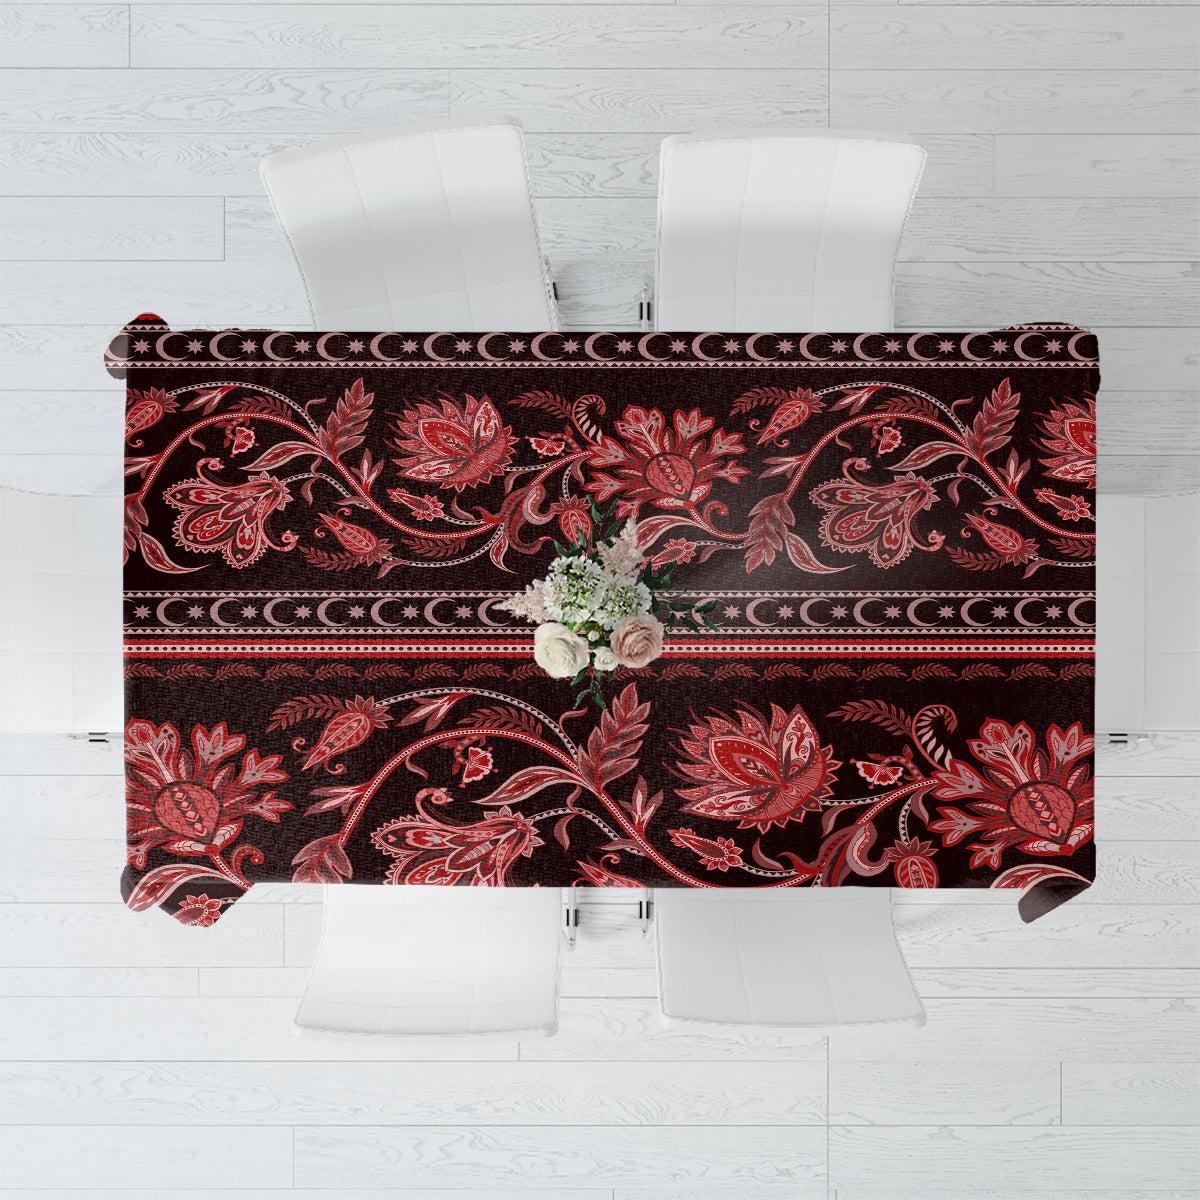 azerbaijan-tablecloth-traditional-pattern-ornament-with-flowers-buta-red